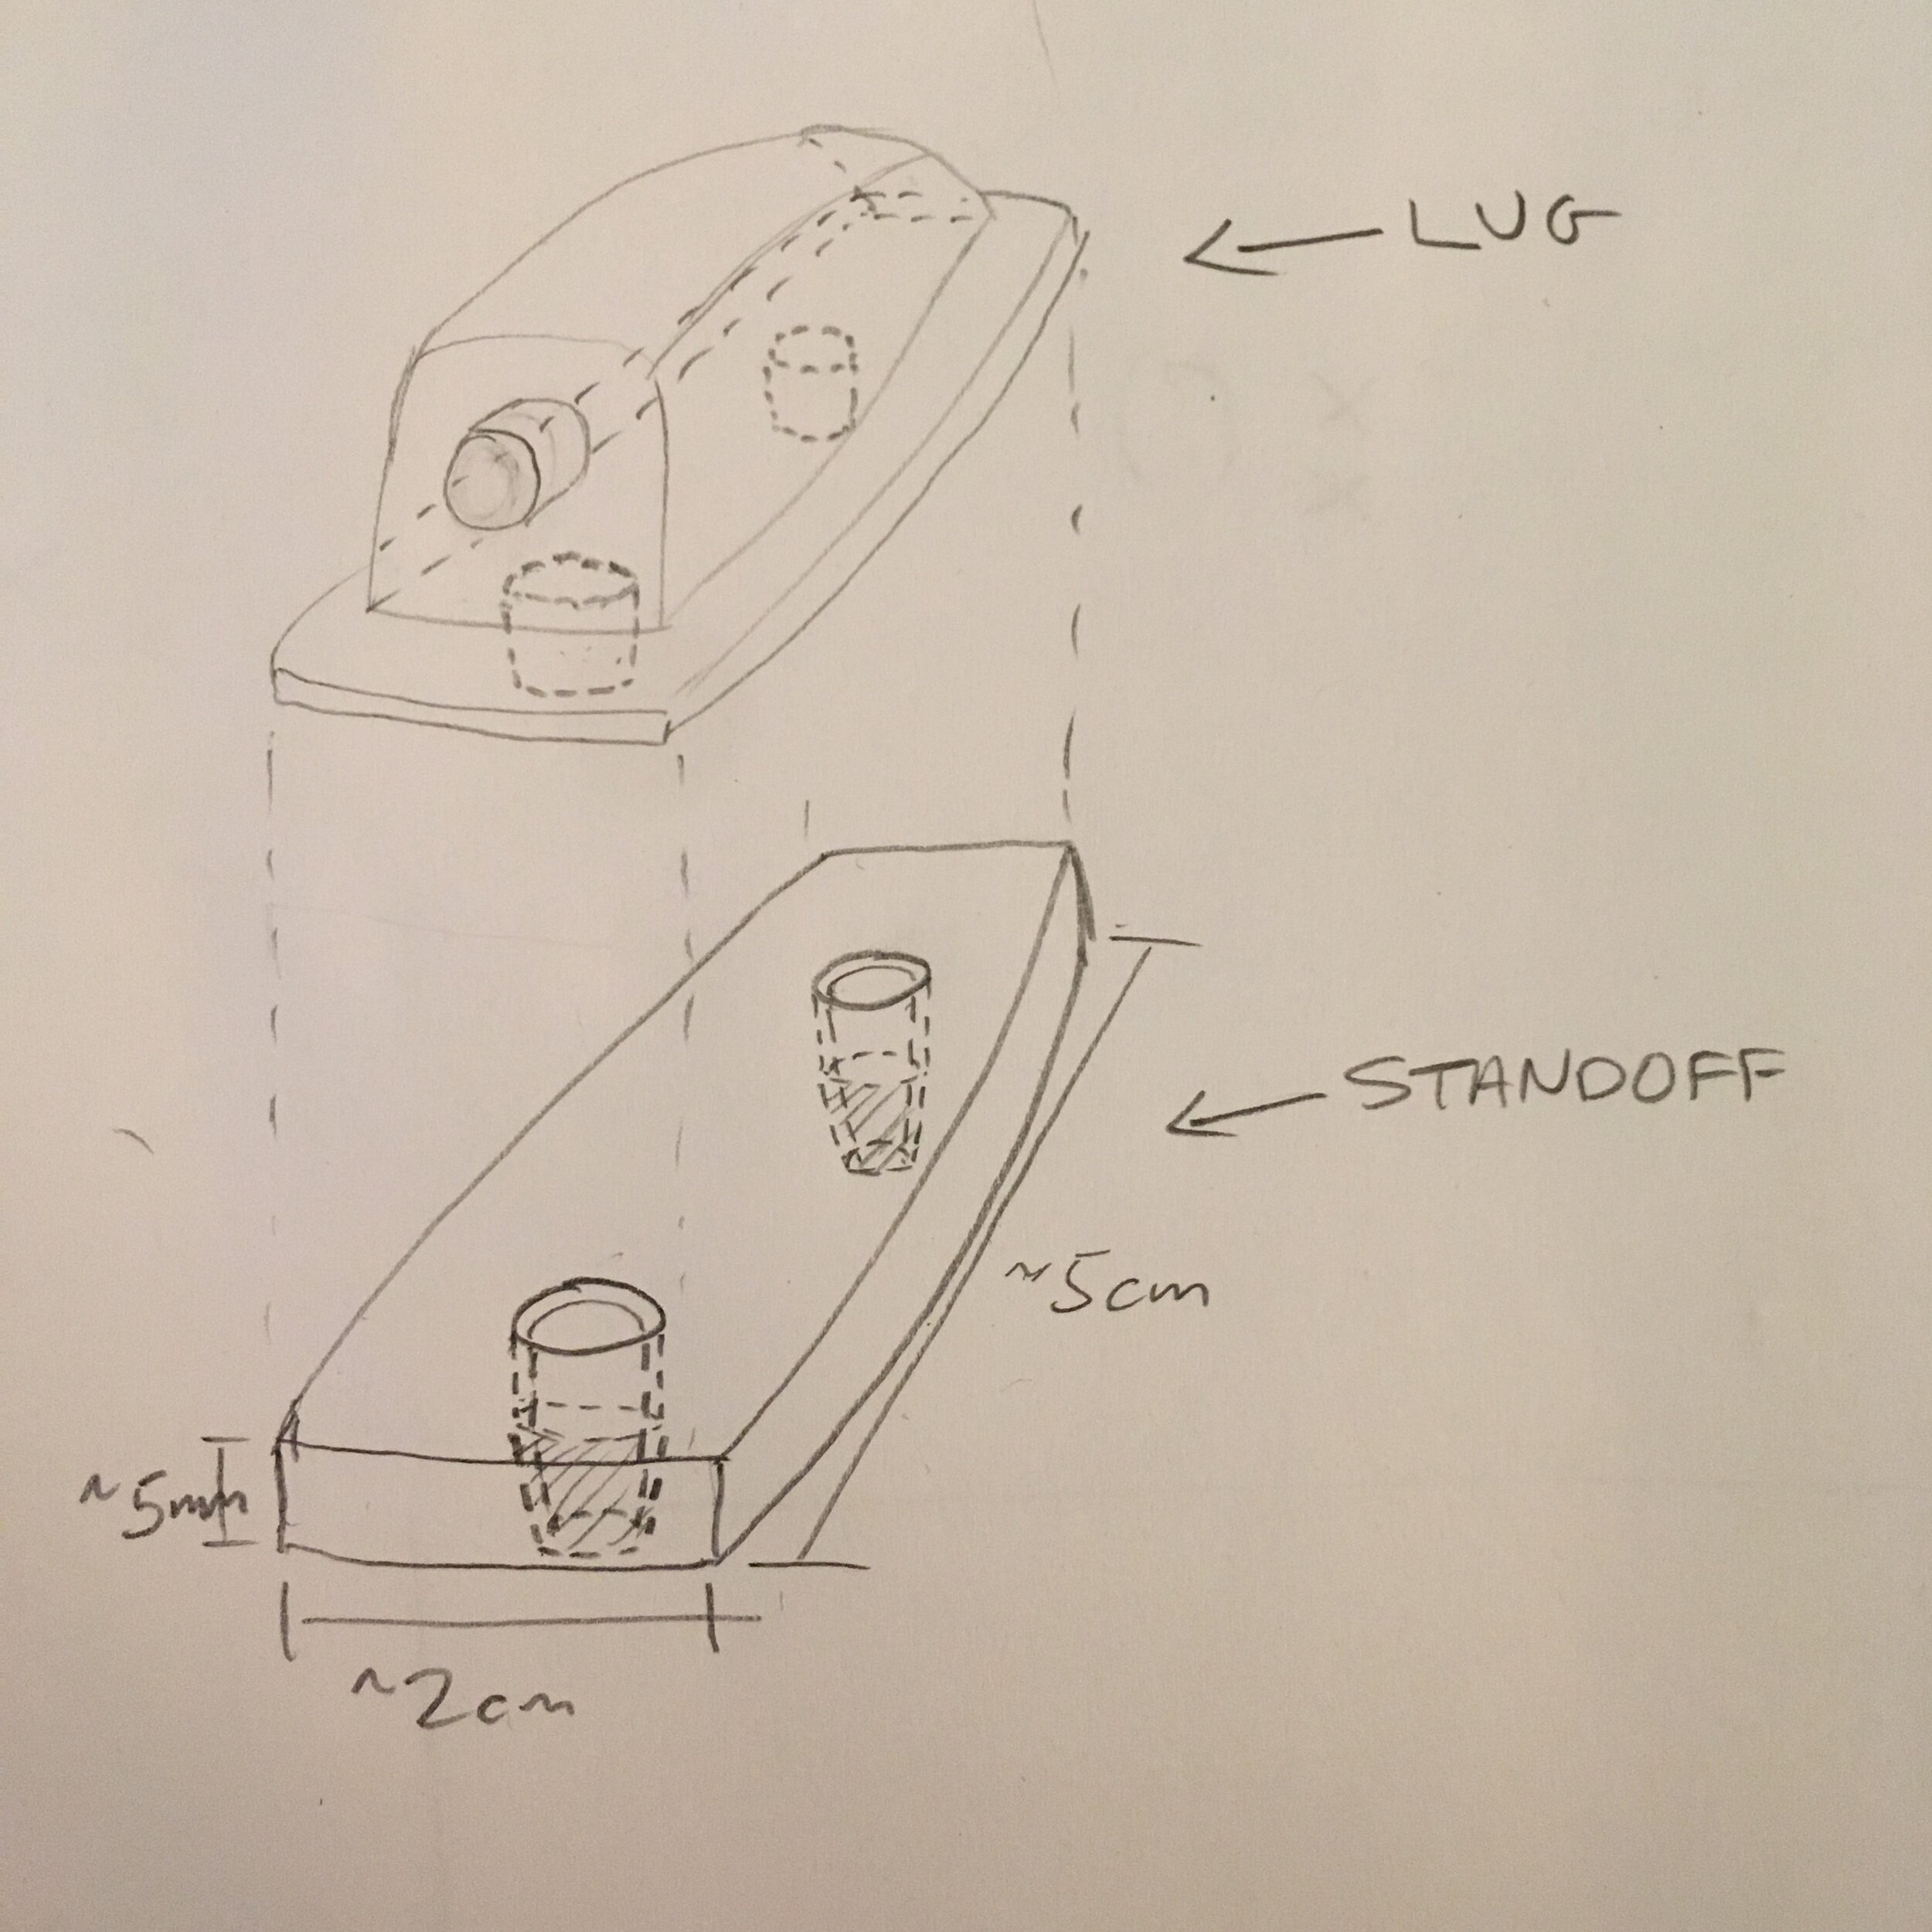 Sketch of lug standoff with measurements